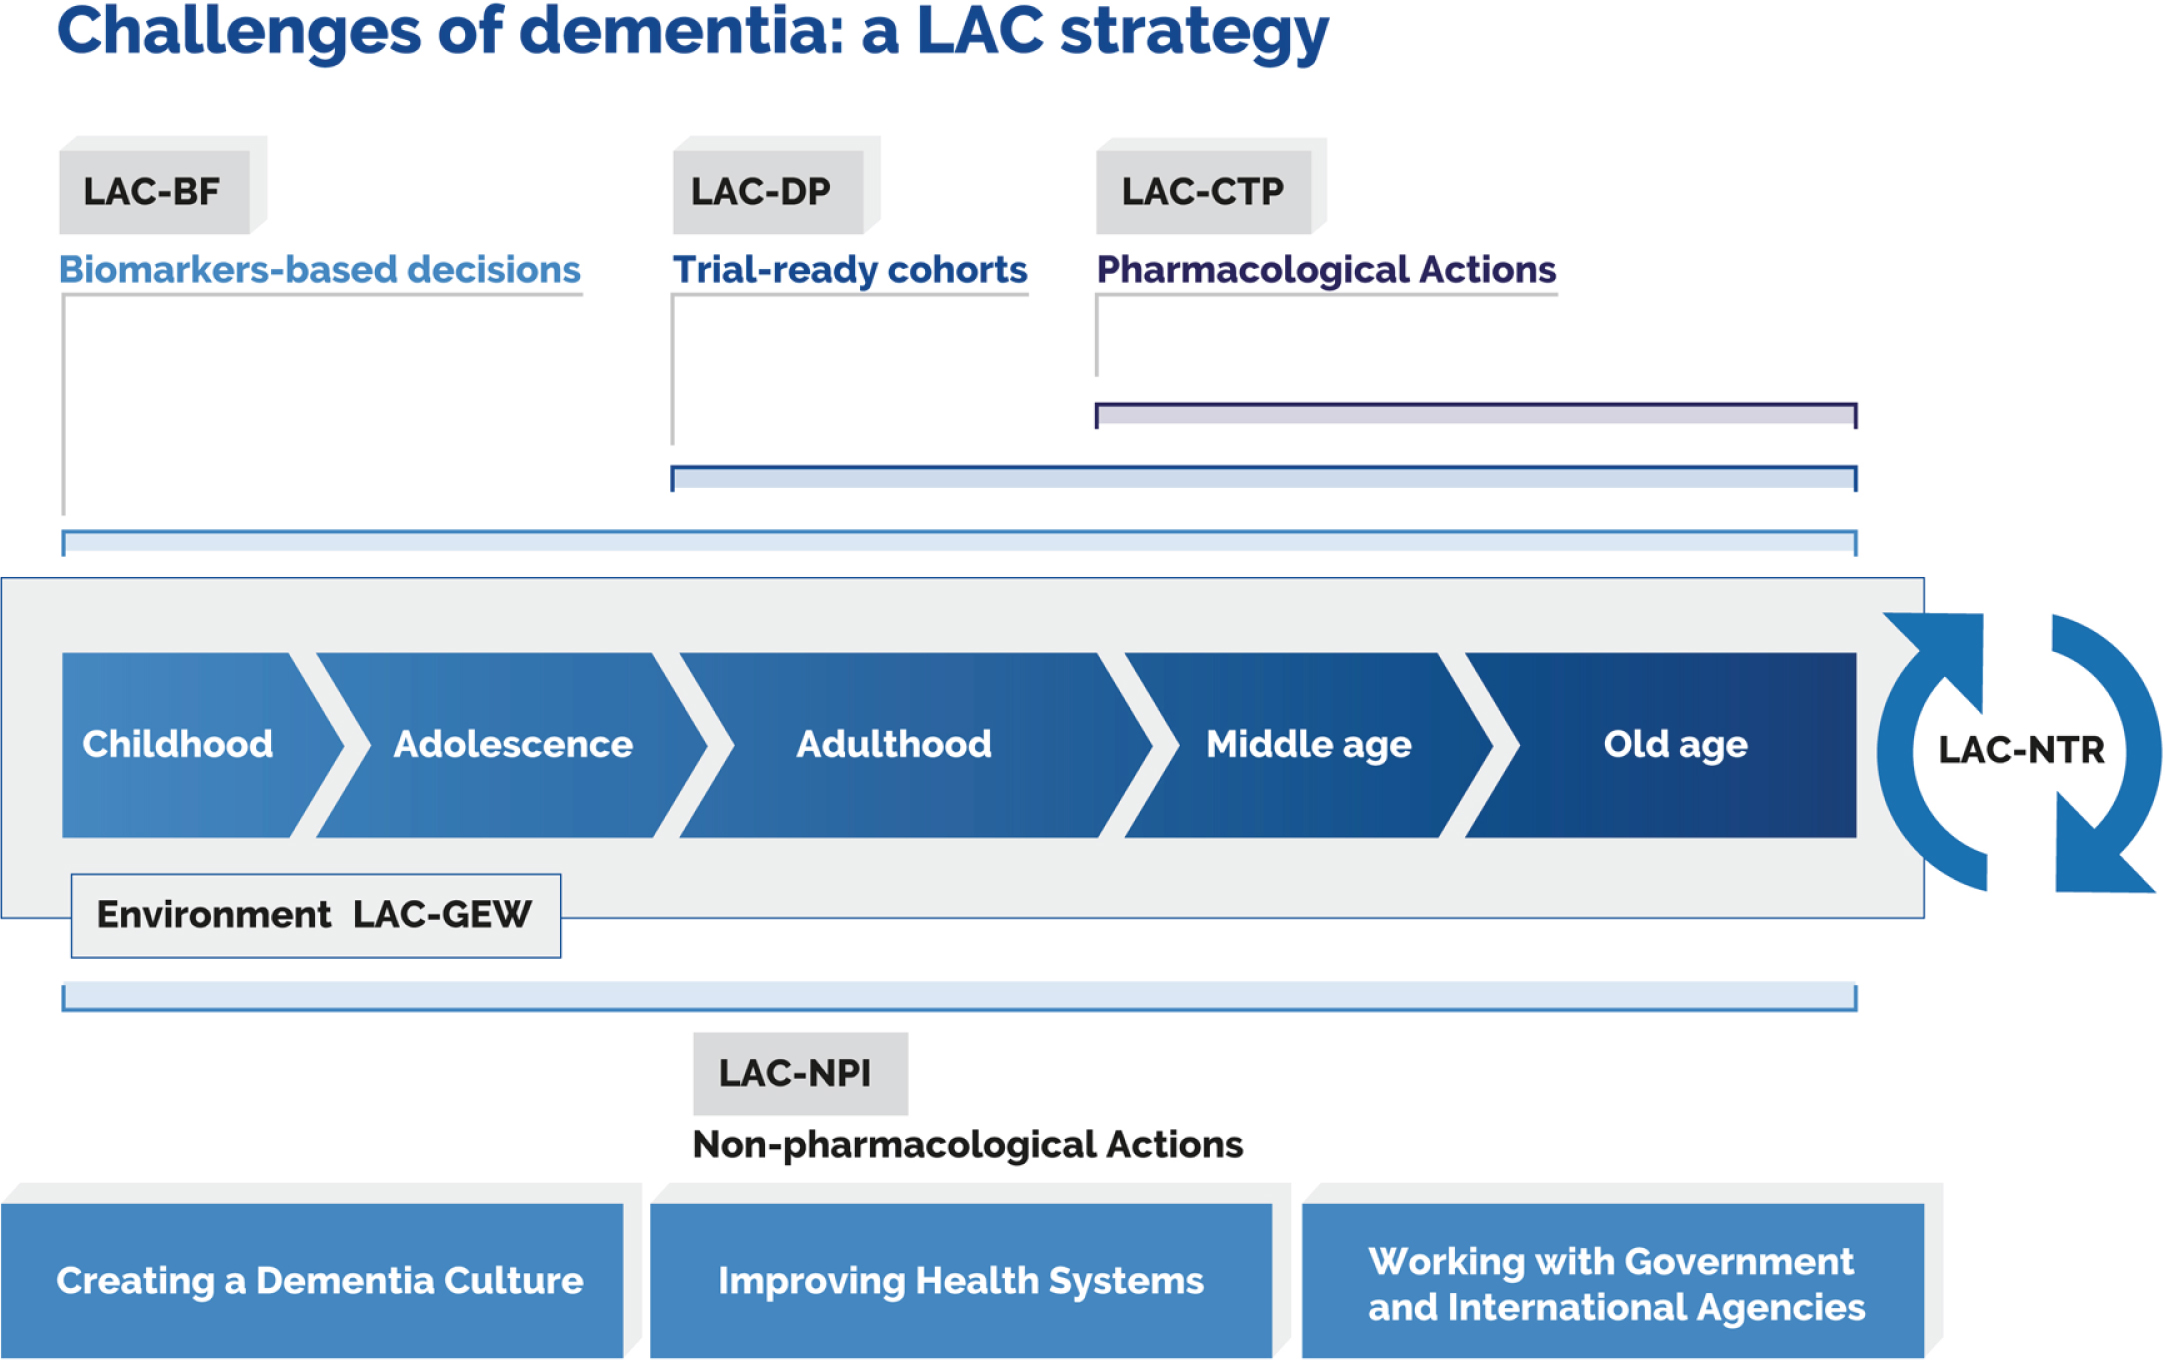 Knowledge-to-action framework. The diagram captures challenges posed by dementia and the related mapping of key actions. Such actions may be linked to specific working groups that have been included in the framework. This approach comprises a biomarker framework (LAC-BF), genetics and epidemiology workgroup (LAC-GEW), dementia platform (LAC-DP), clinical trial program (LAC-CTP), nonpharmacological interventions (LAC-NPI), and an LAC network for translational research (LAC-NTR). Reproduced with authorization from [1].